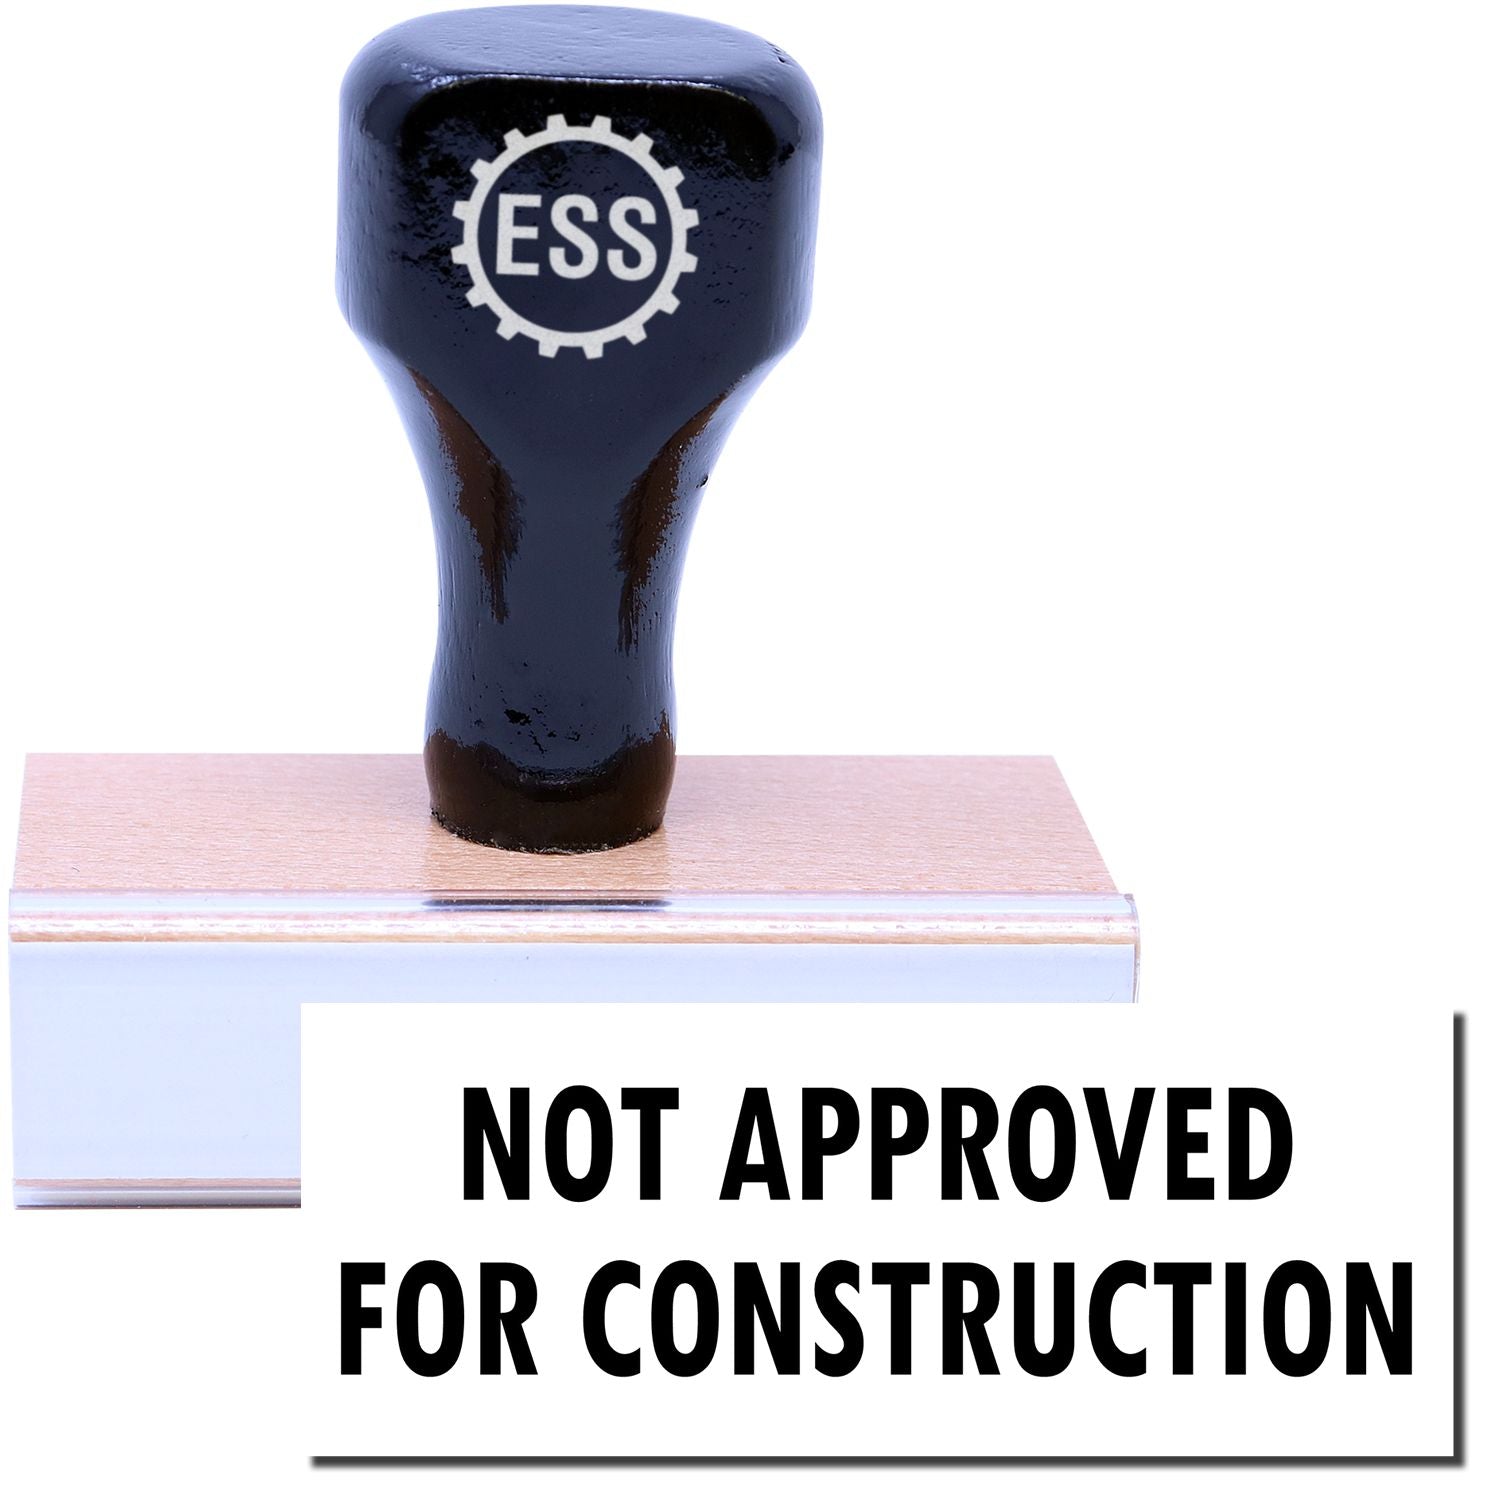 A stock office rubber stamp with a stamped image showing how the text "NOT APPROVED FOR CONSTRUCTION" is displayed after stamping.